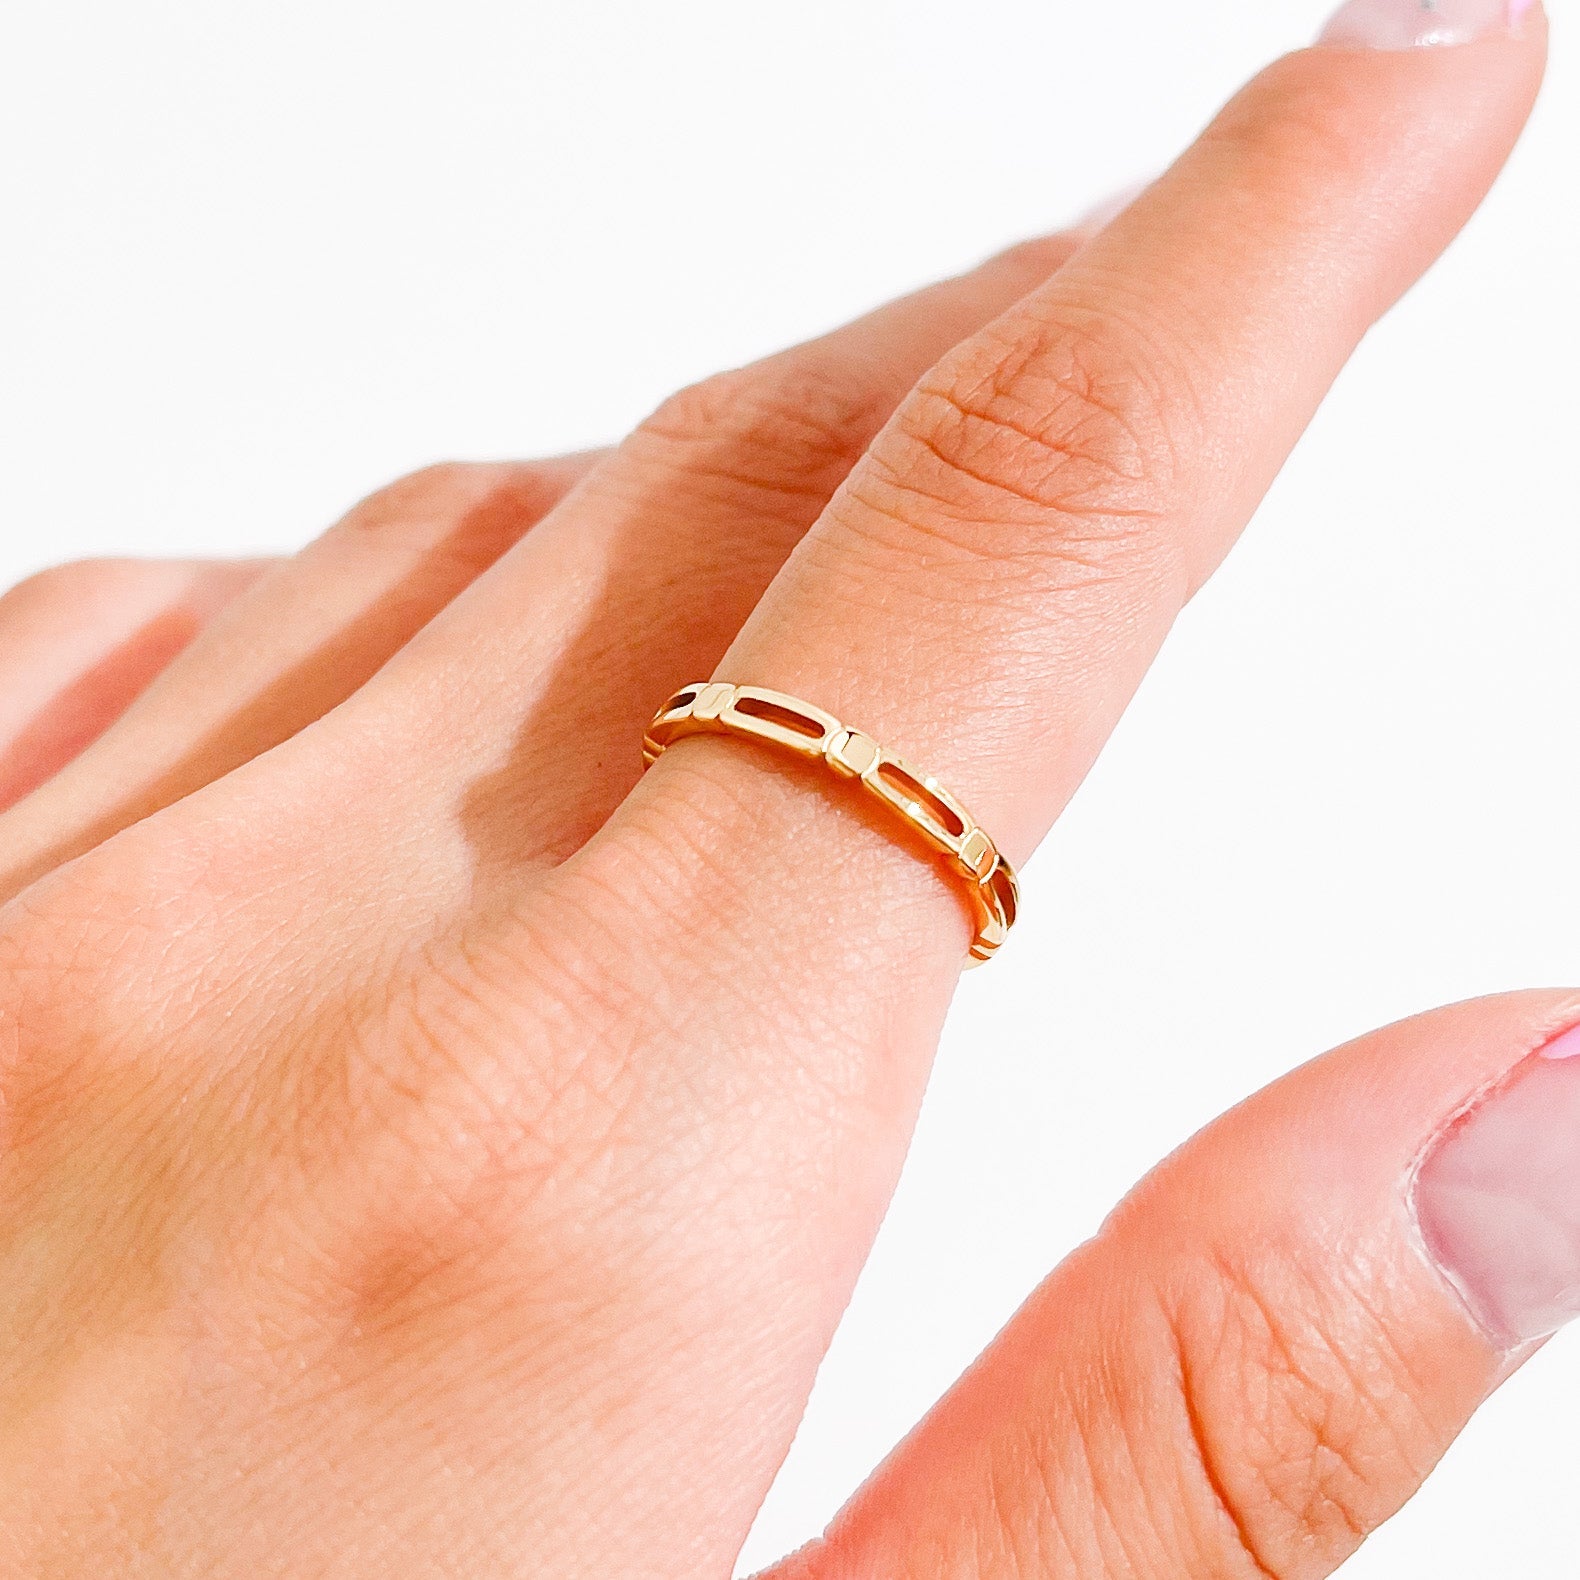 Melanie Ring in Gold - Flaire & Co.